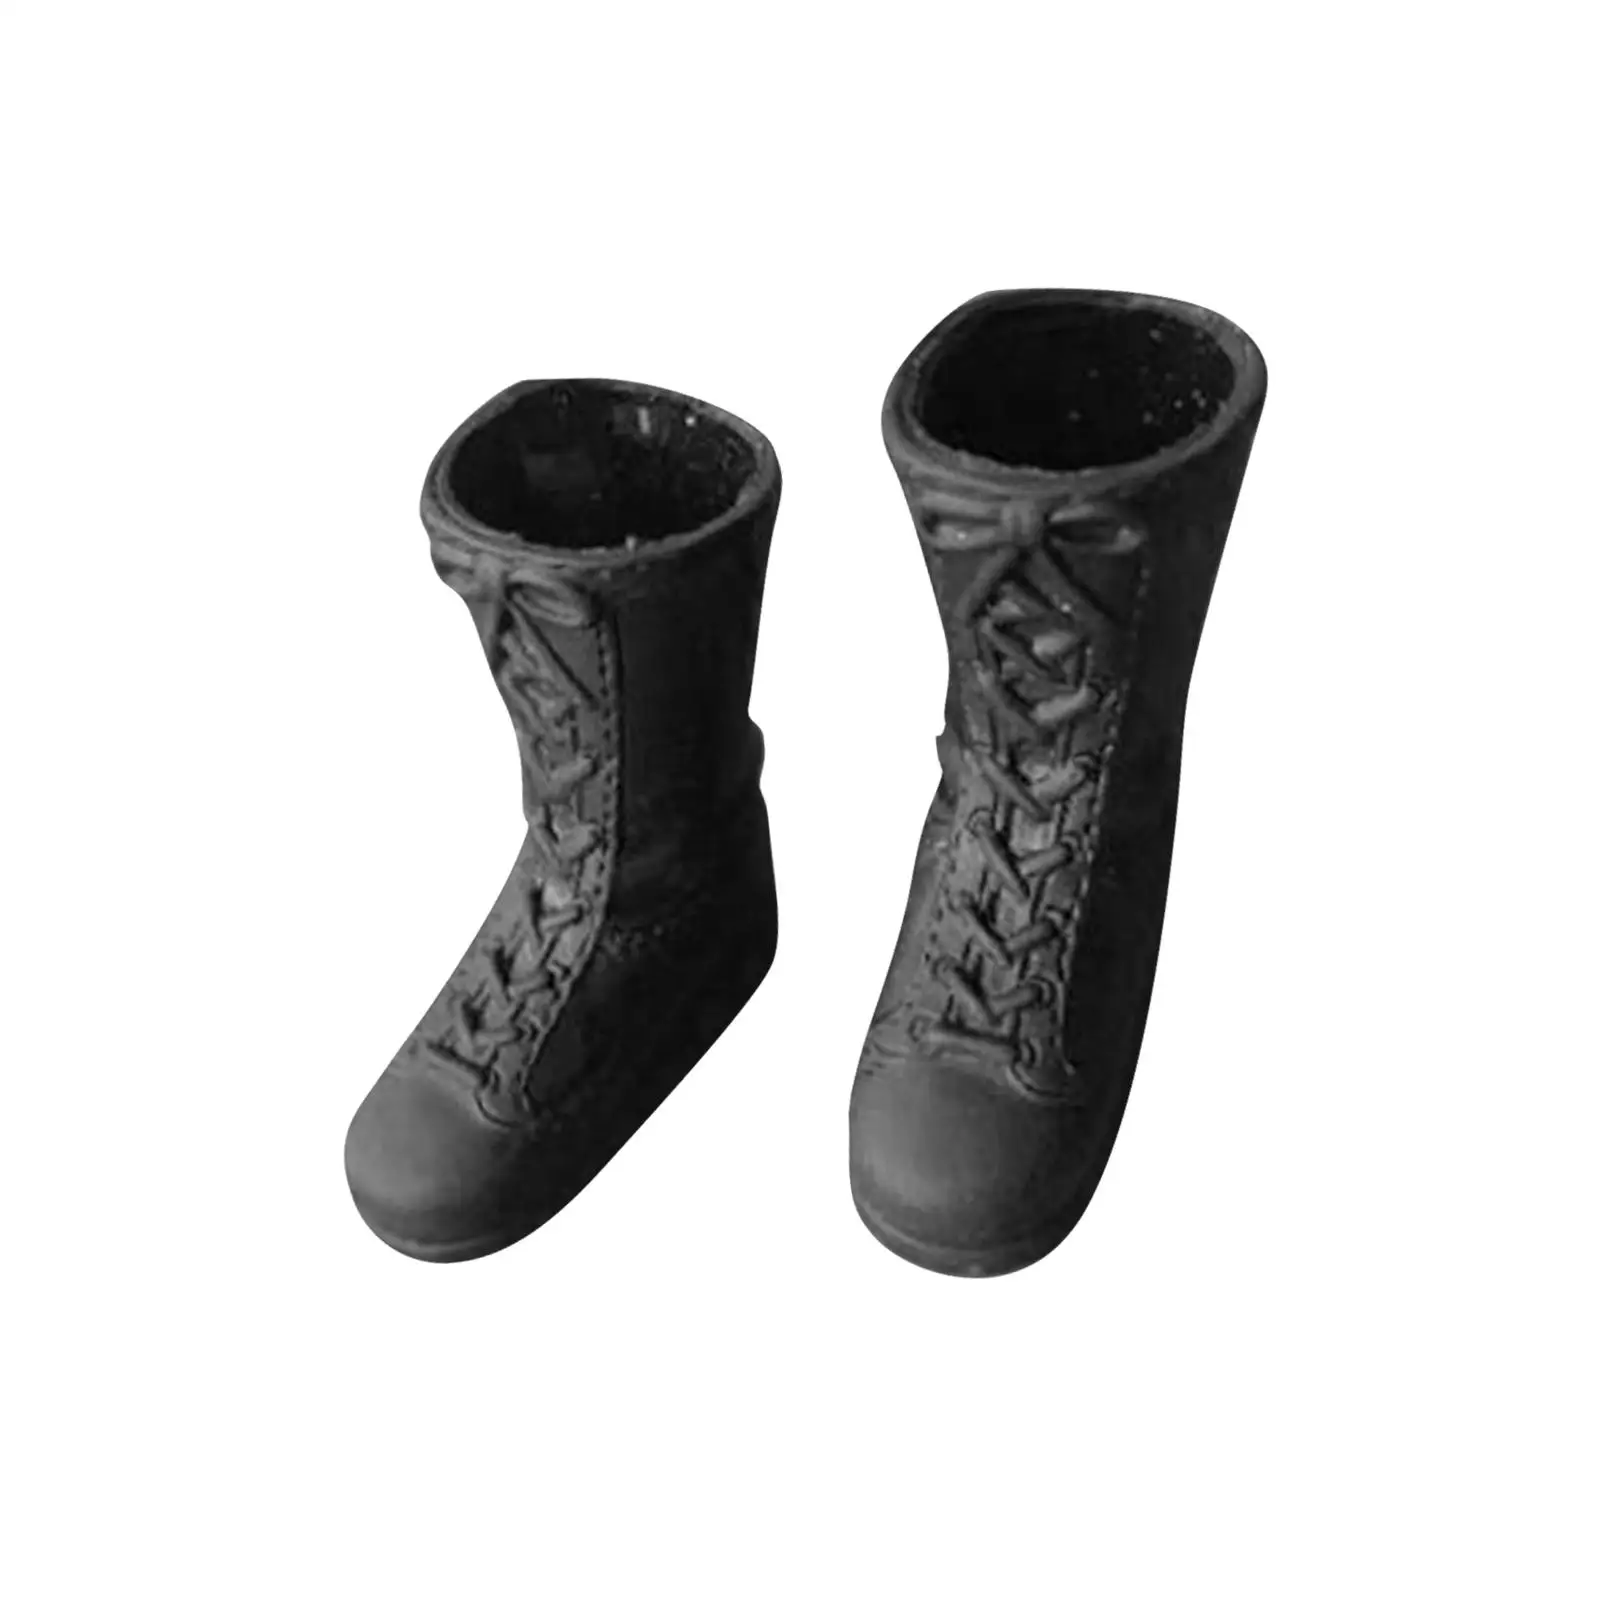 1/6 Scale Figure Booties Shoes Work Boots for 12`` Action Figures Accessory